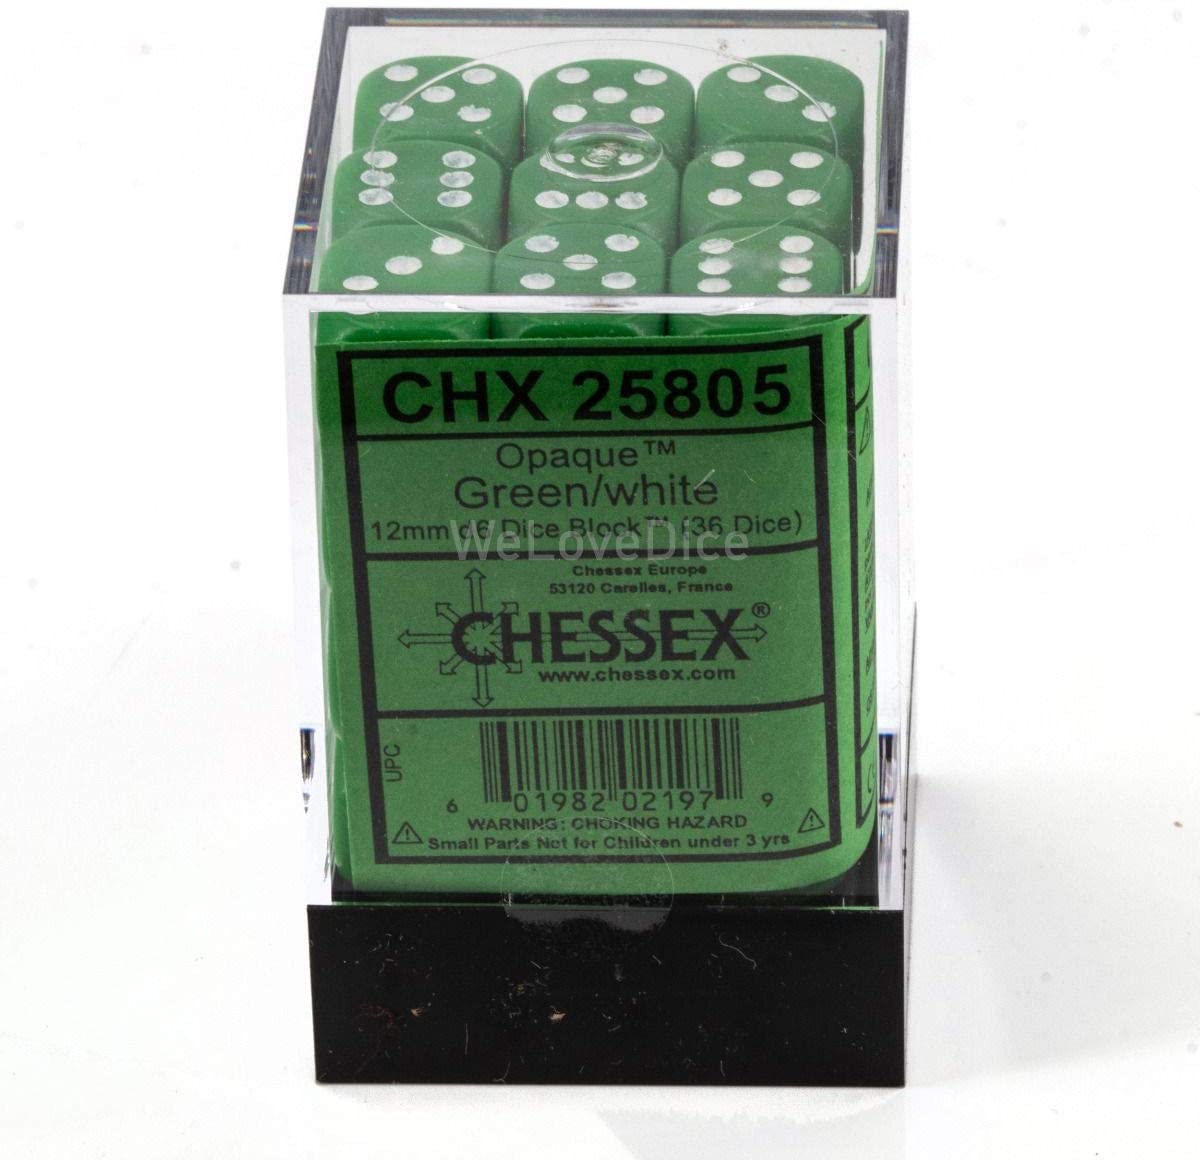 Chessex Dice: D6 Block 12mm - Opaque - Green with White (CHX 25805) - Gamescape